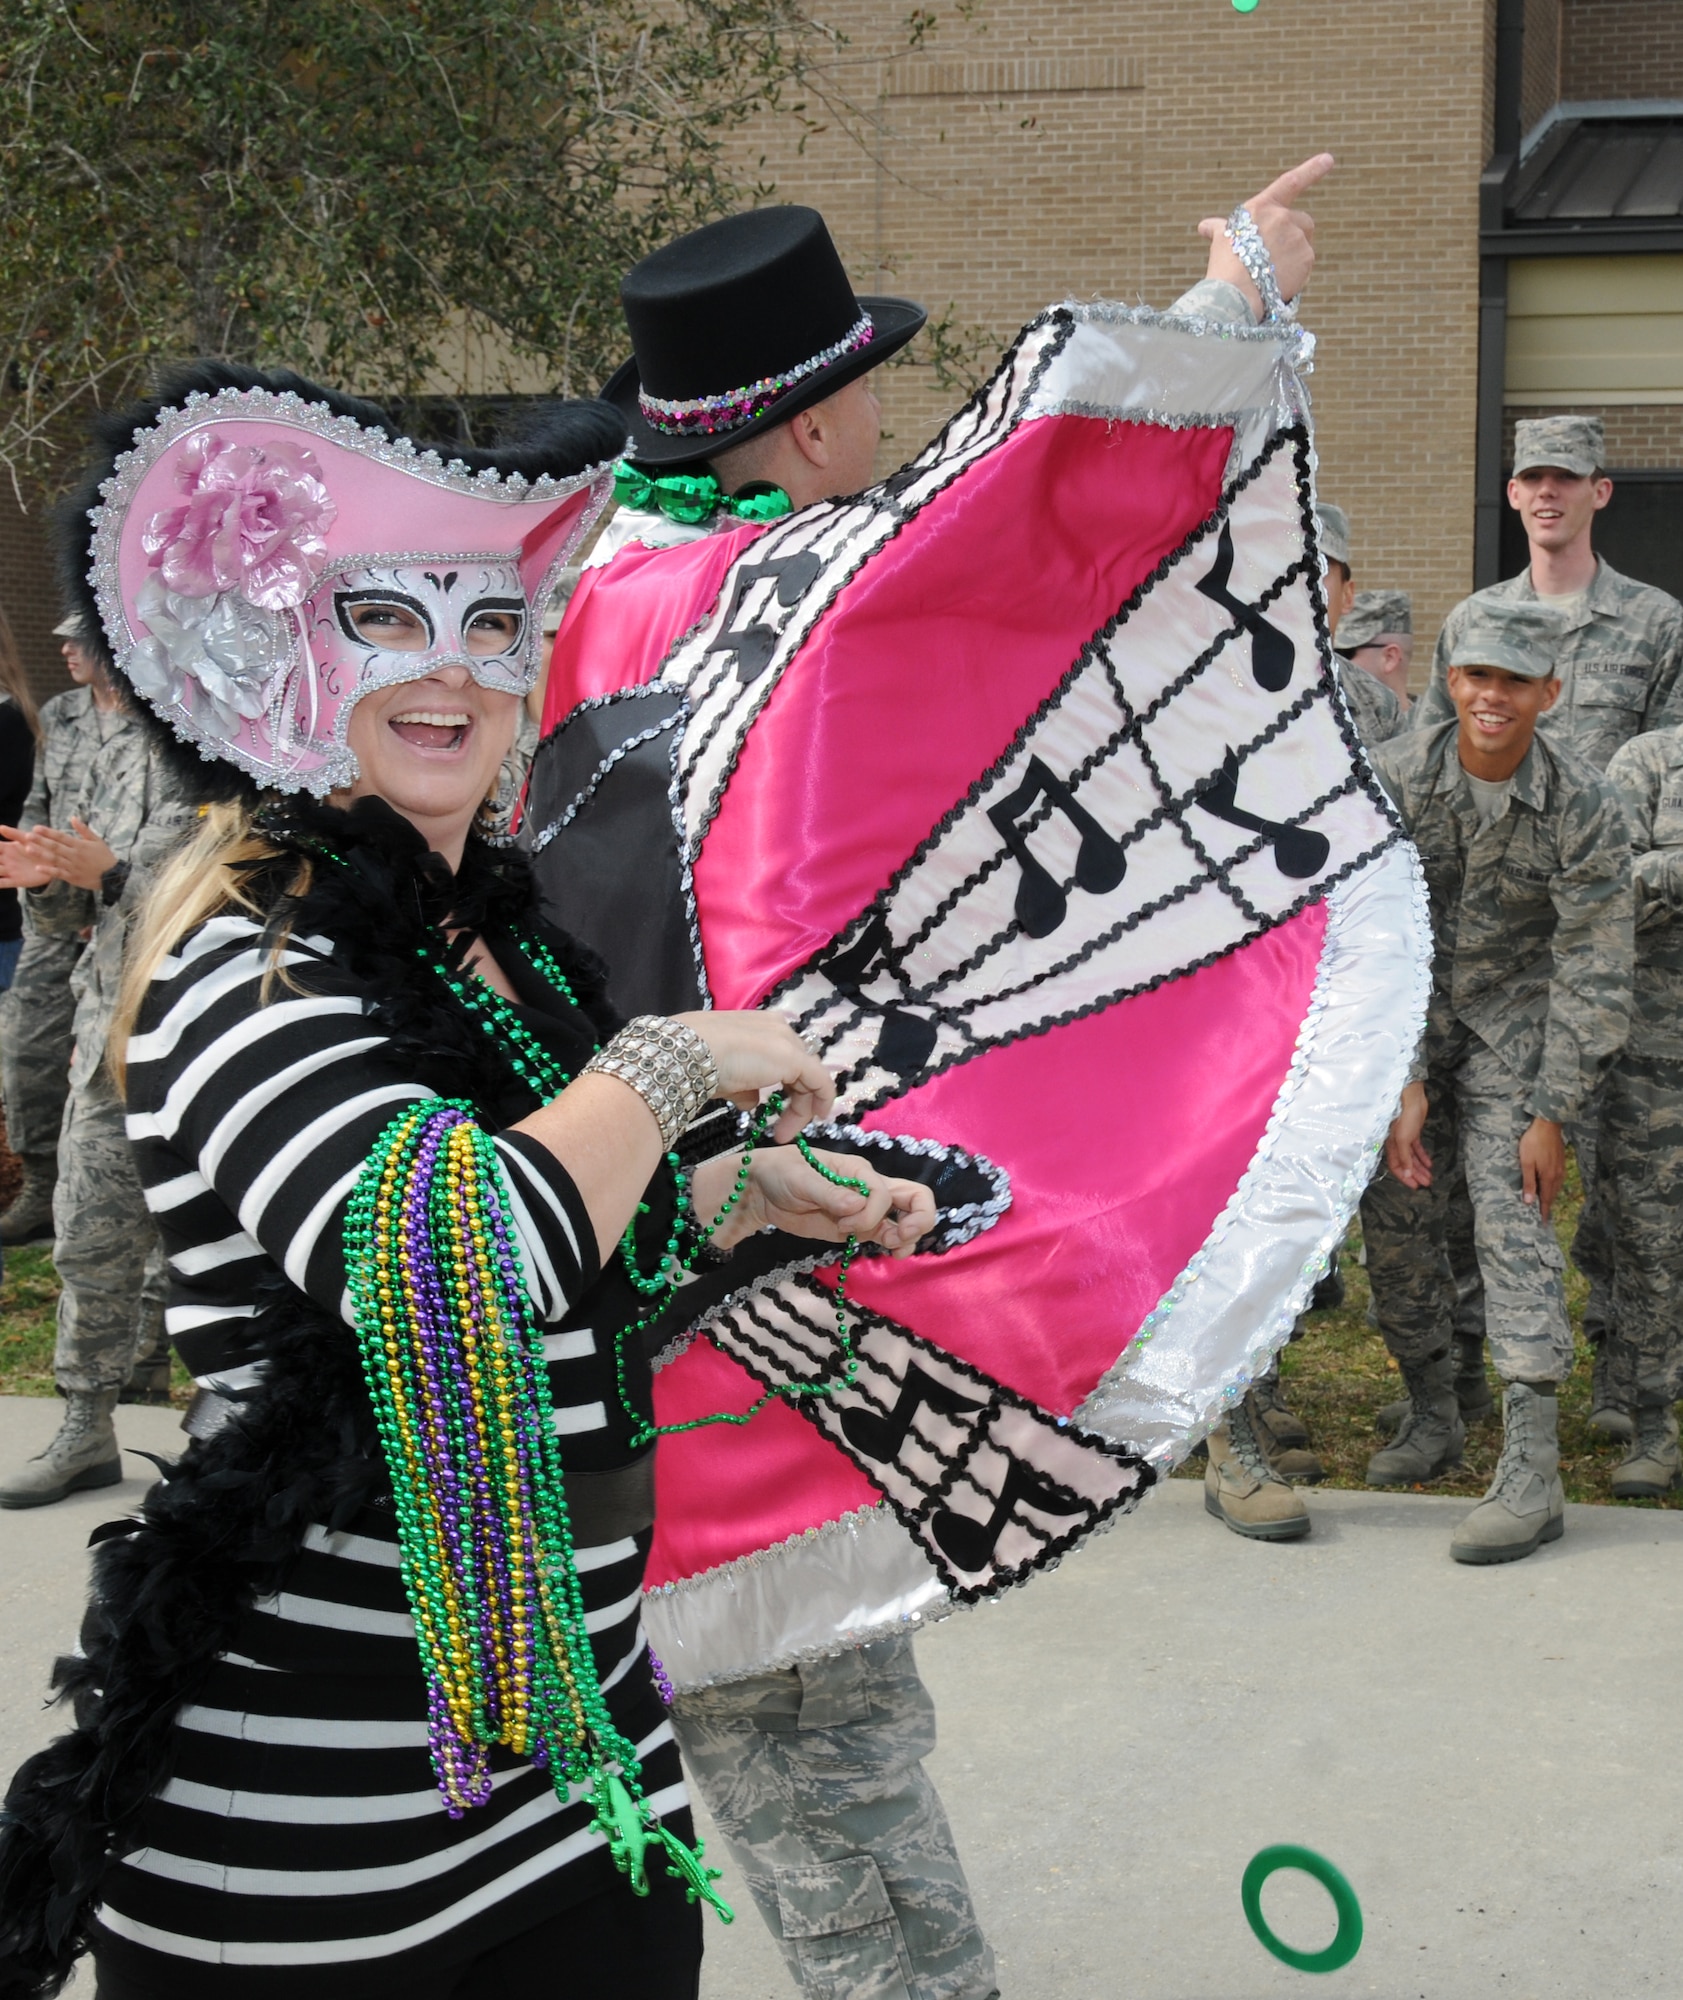 Jo and Lt. Col. Jeffrey McLemore, 334th Training Squadron commander, throw beads to the Airmen lining the parade route during the 81st Training Group Mardi Gras parade Feb. 10, 2012, between Thomson Hall and Matero Hall at Keesler Air Force Base, Biloxi, Miss.   (U.S. Air Force photo by Kemberly Groue)